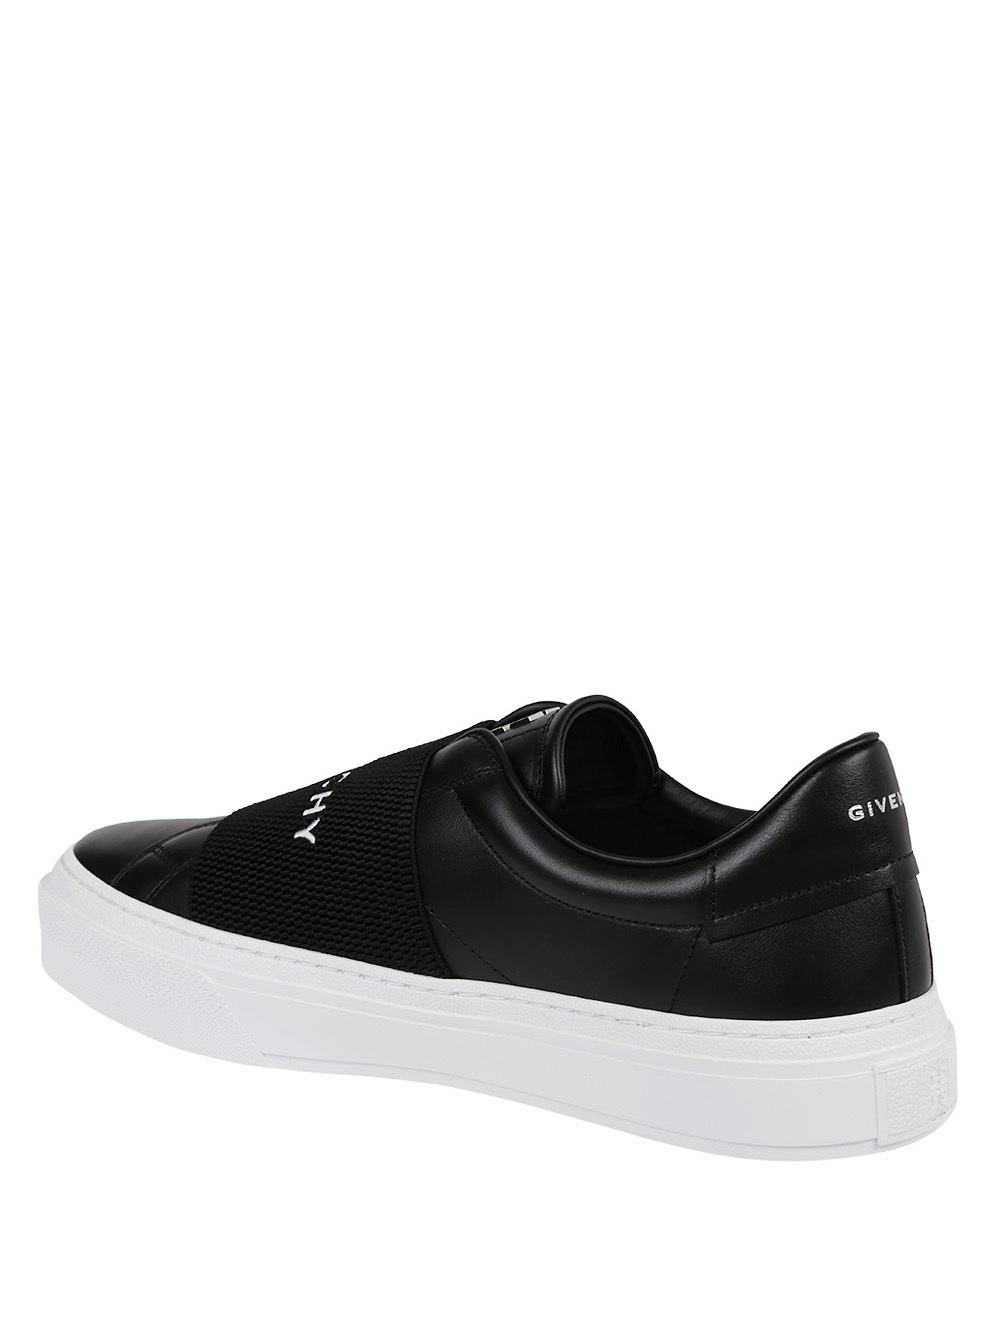 Town leather sneakers in black - Givenchy | Mytheresa